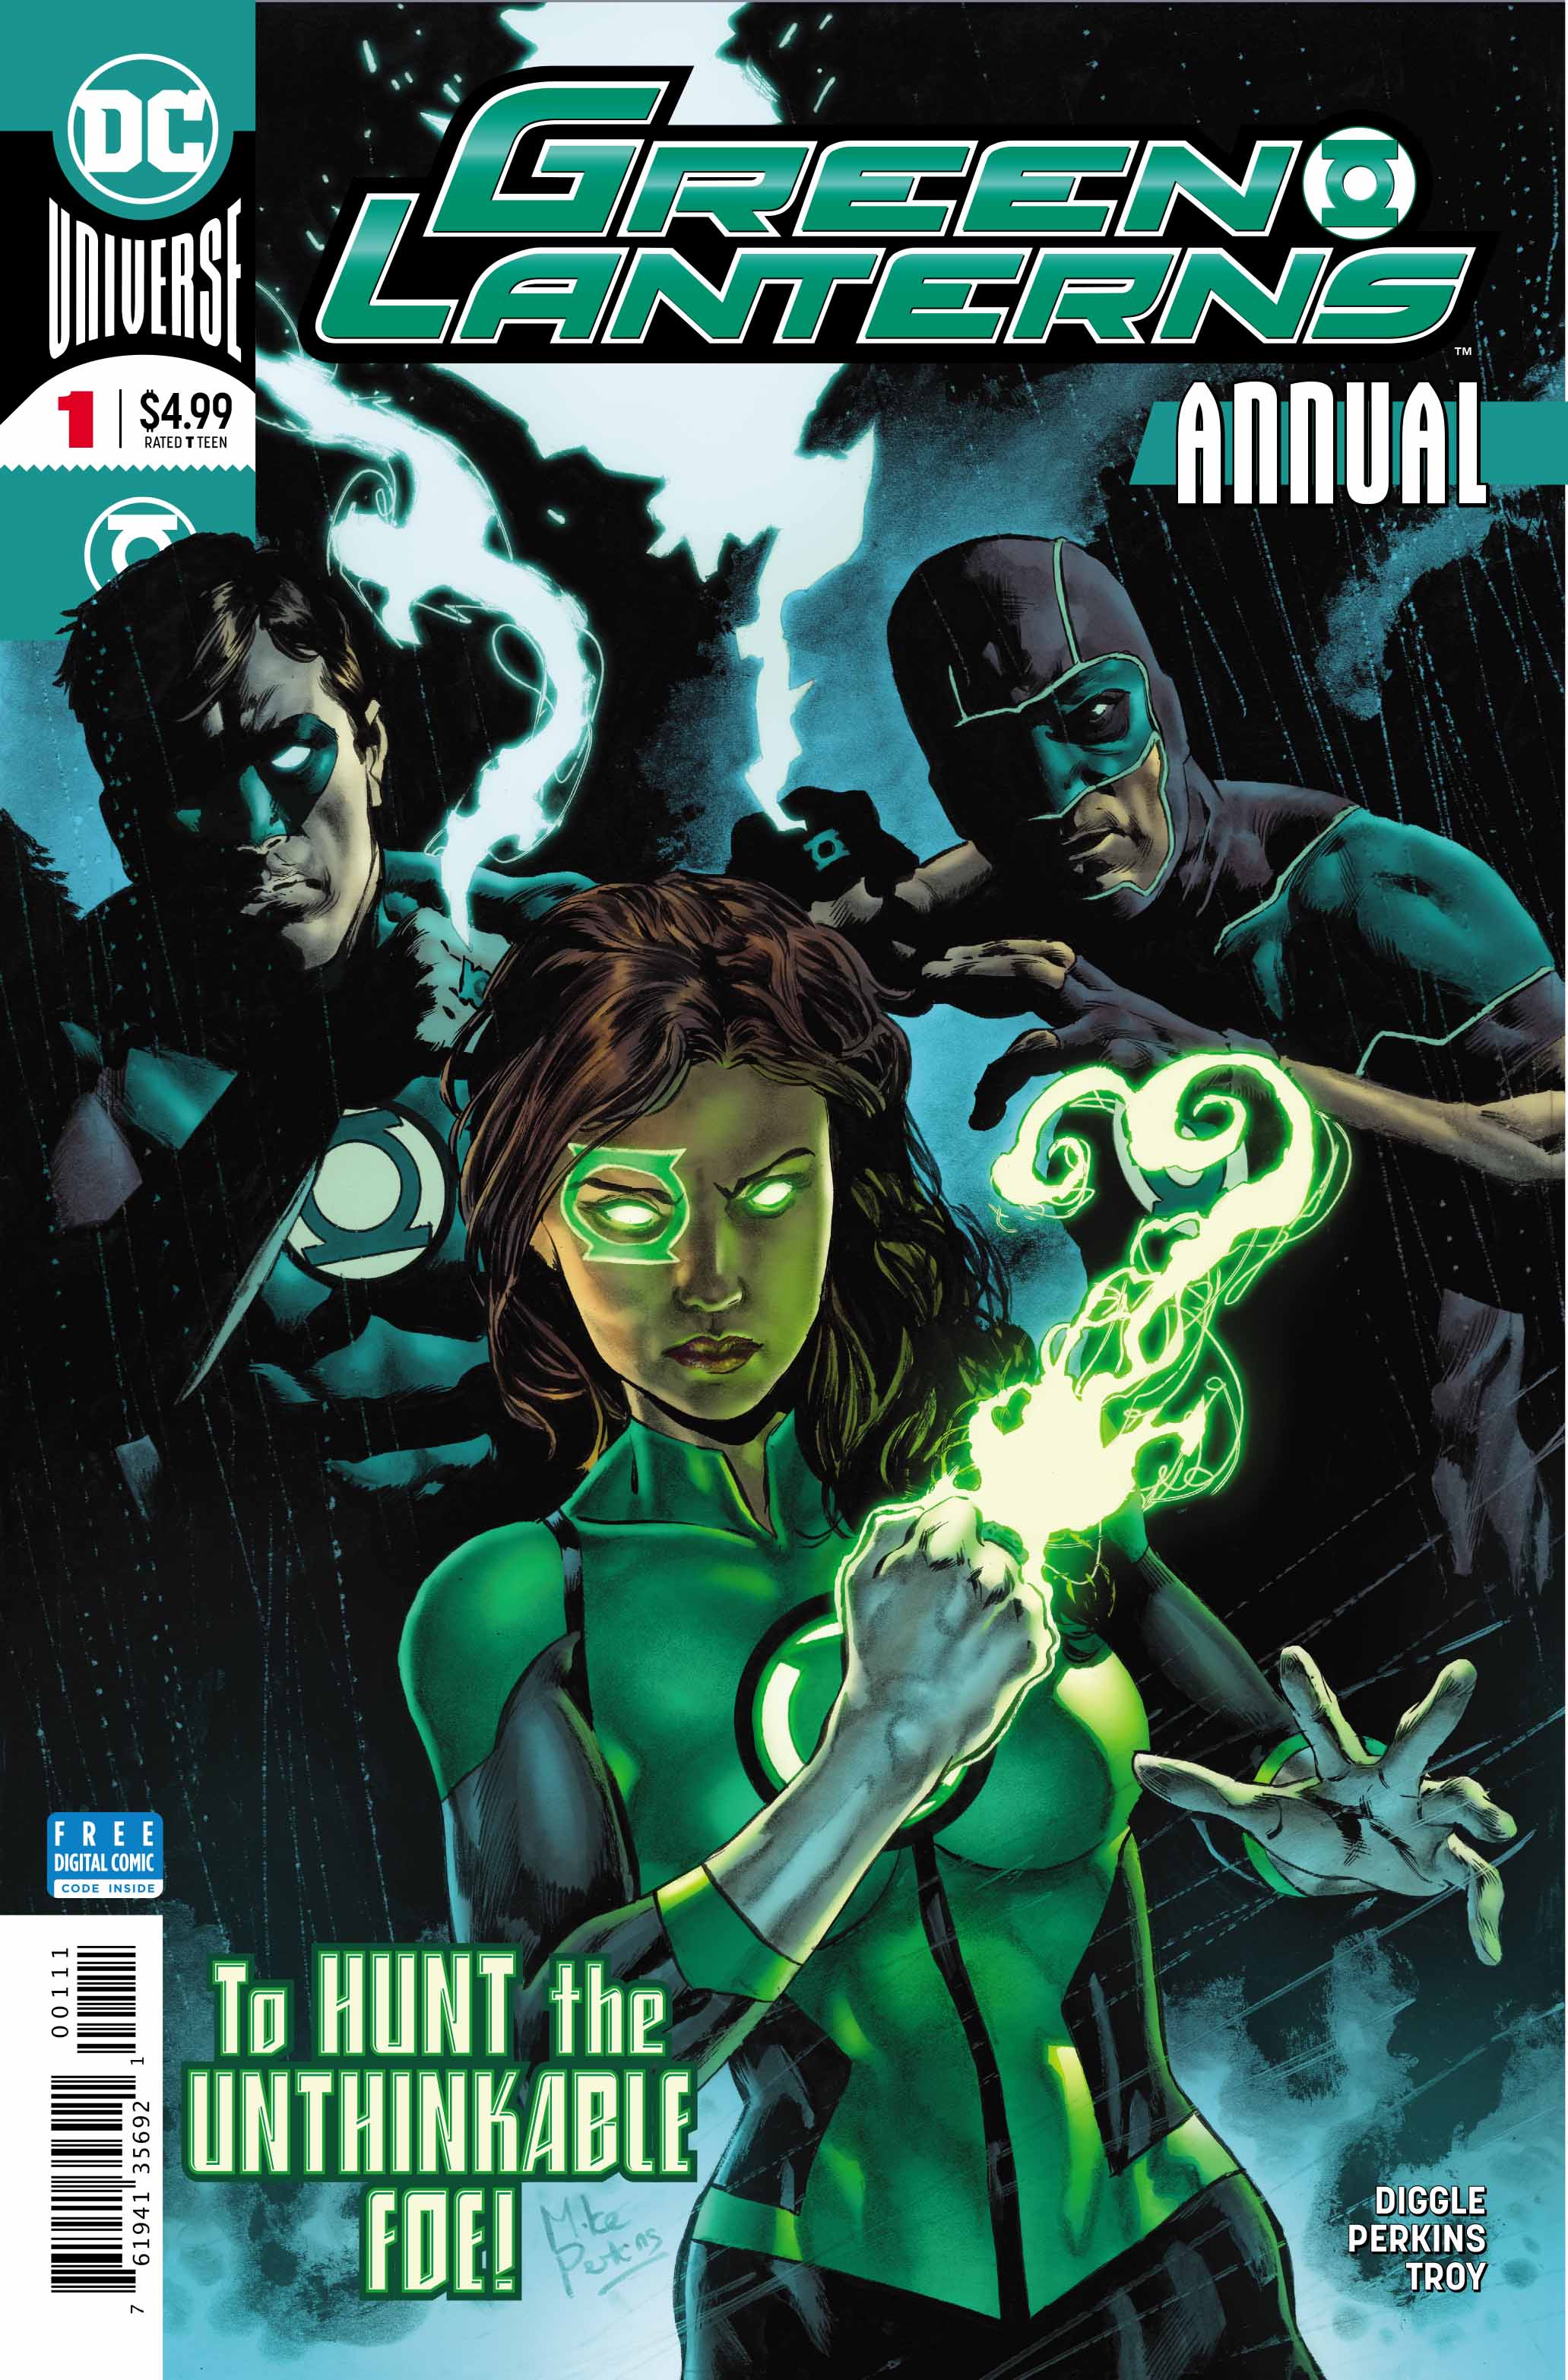 Green Lanterns Annual #1 review: An entertaining but flawed one-shot